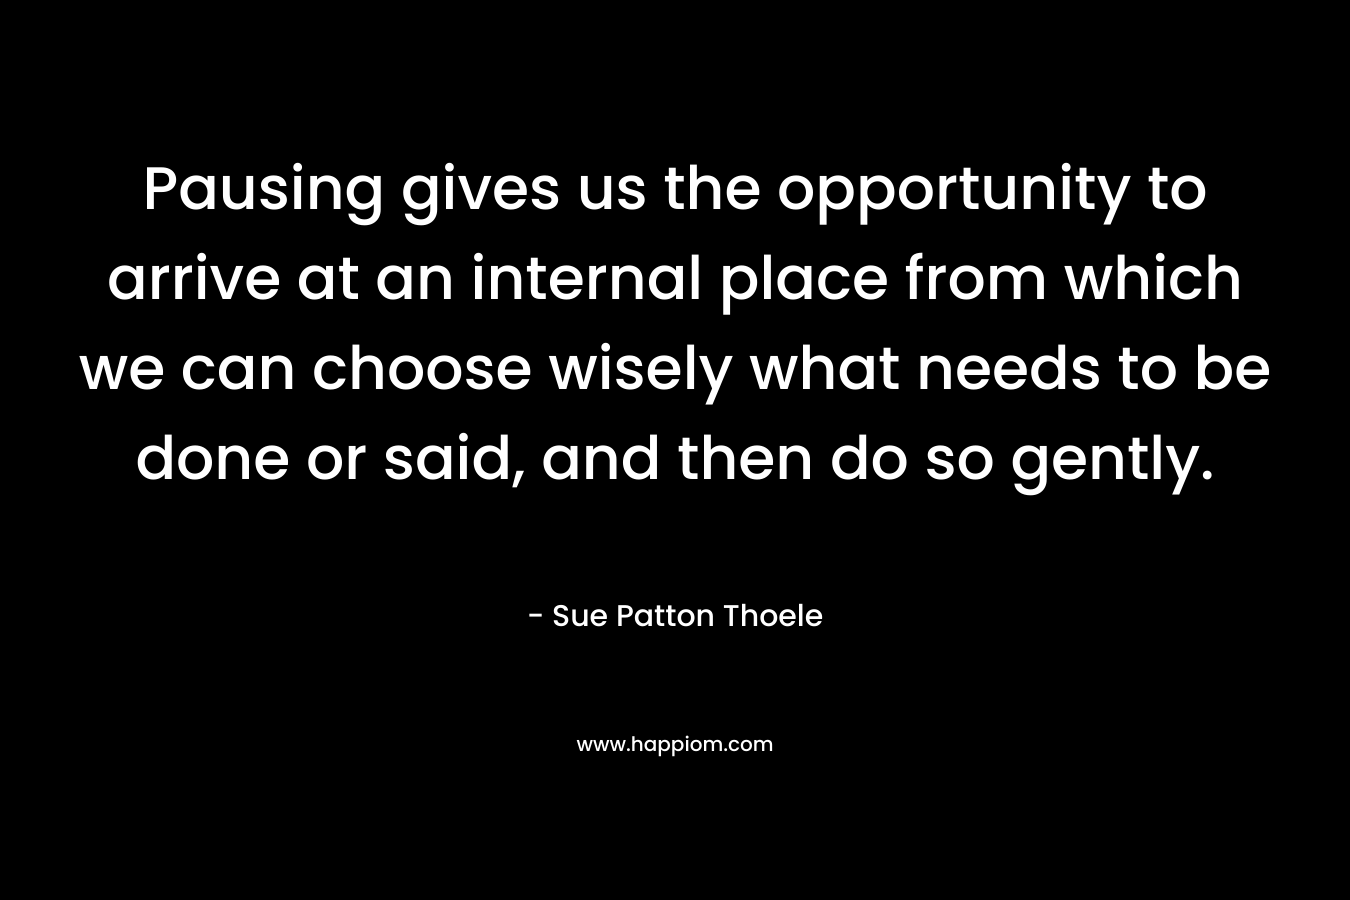 Pausing gives us the opportunity to arrive at an internal place from which we can choose wisely what needs to be done or said, and then do so gently. – Sue Patton Thoele